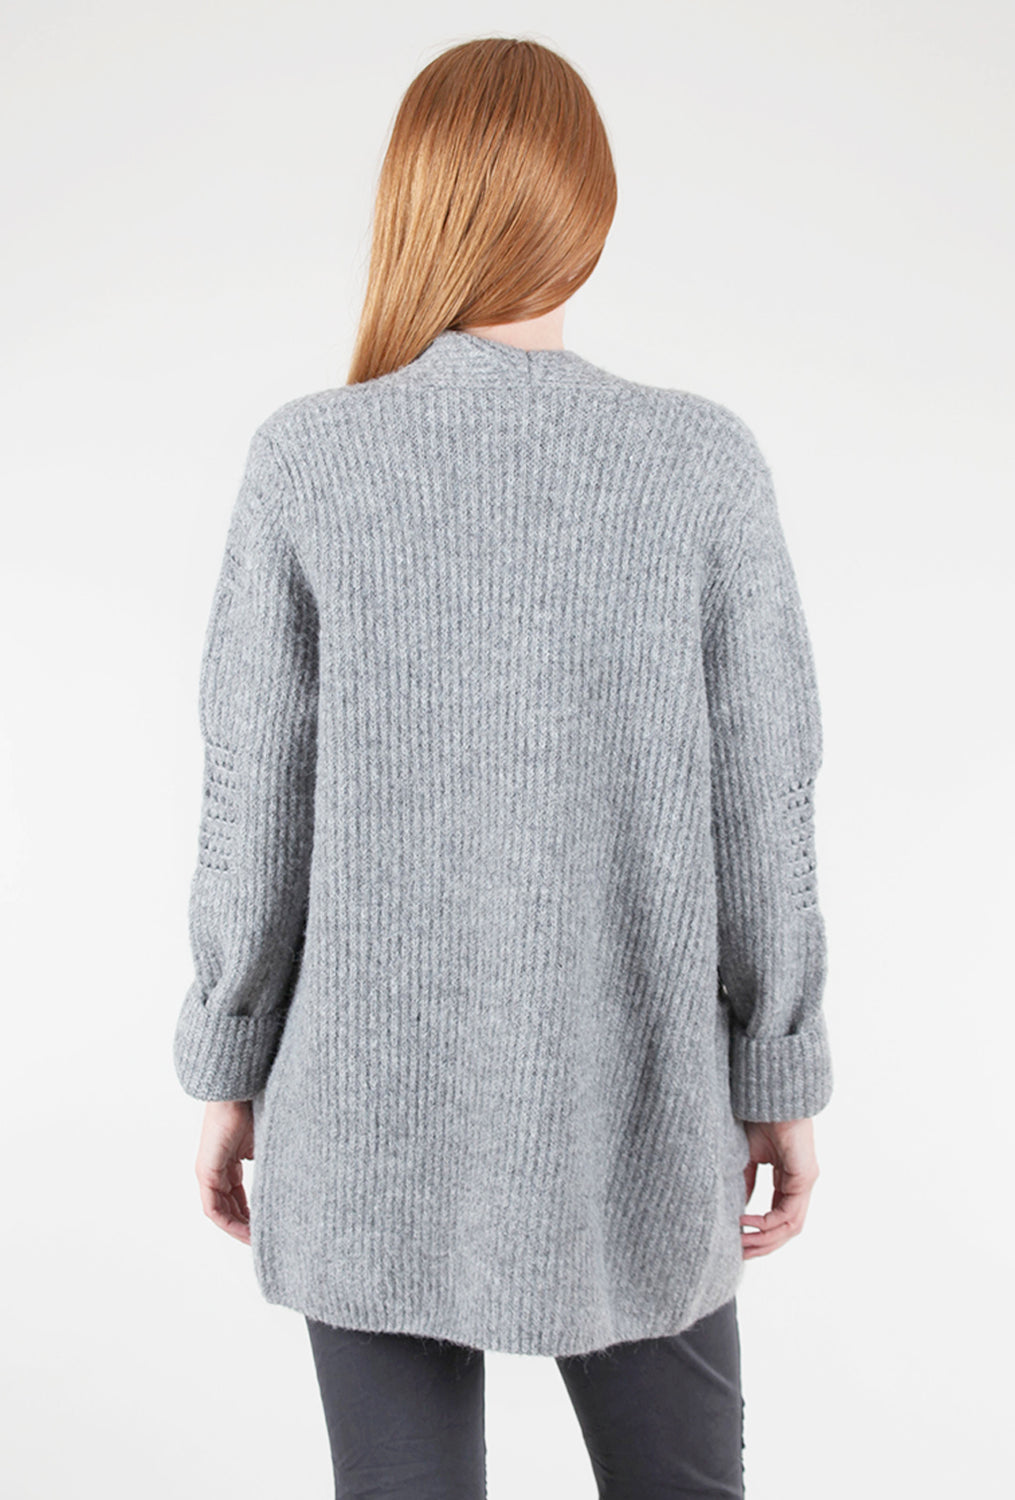 Lawrence Cardigan, Fossil Gray